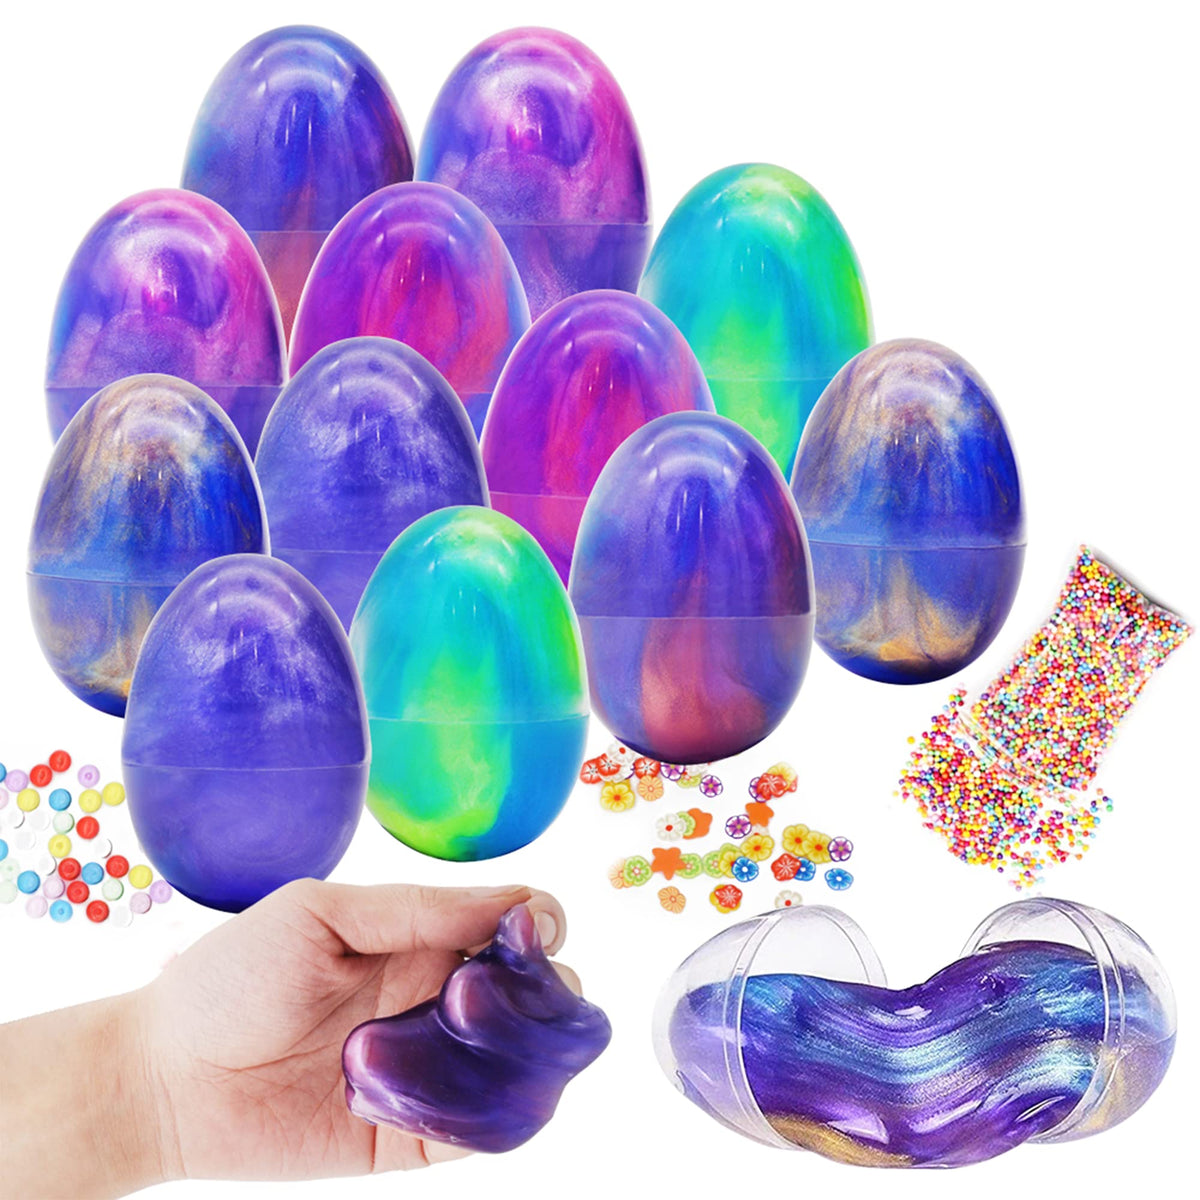 JOYIN 12 PCs Silly Purple Slime Colorful Putty with Accessories for All Ages Kids, Stress Relief Sludge Toys, Prefilled Easter Theme Party Favor Supplies, Basket Stuffers, Great Family Games